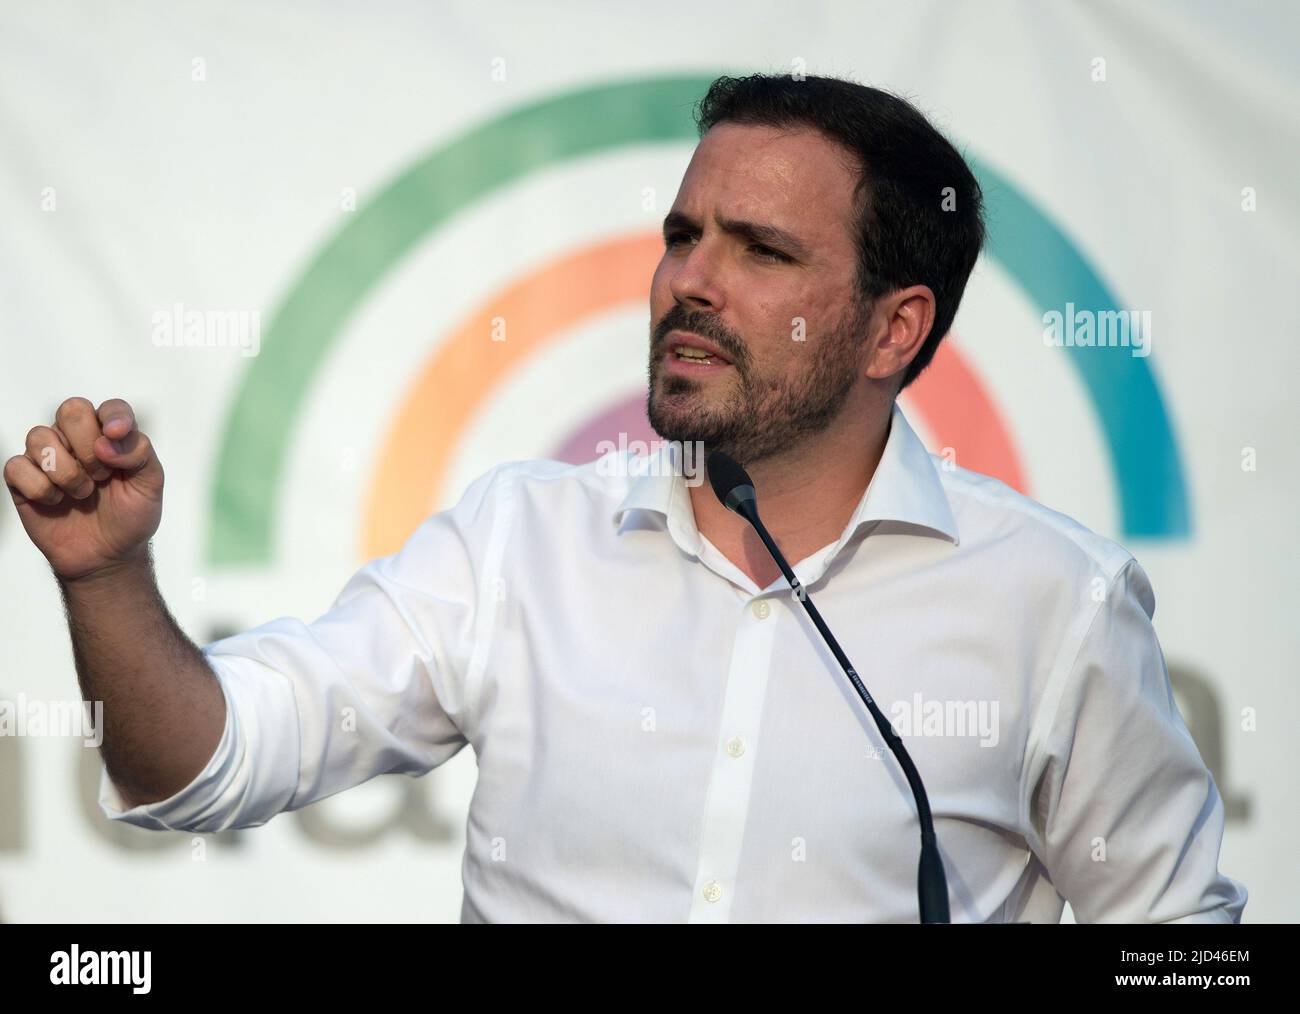 Malaga, Spain. 17th June, 2022. Spain's Minister of Consumer Affairs Alberto Garzon delivers a speech in a rally during the closing of Andalusian electoral campaign. Following the announcement of regional elections to be held on the 19th of June, the main political parties have started holding events and rallies in different cities in Andalusia. Several media polls place the Andalusian Popular Party in the lead, despite the rise of the Spanish far-right party VOX. Parties on the left of the political spectrum are fragmented. Credit: SOPA Images Limited/Alamy Live News Stock Photo